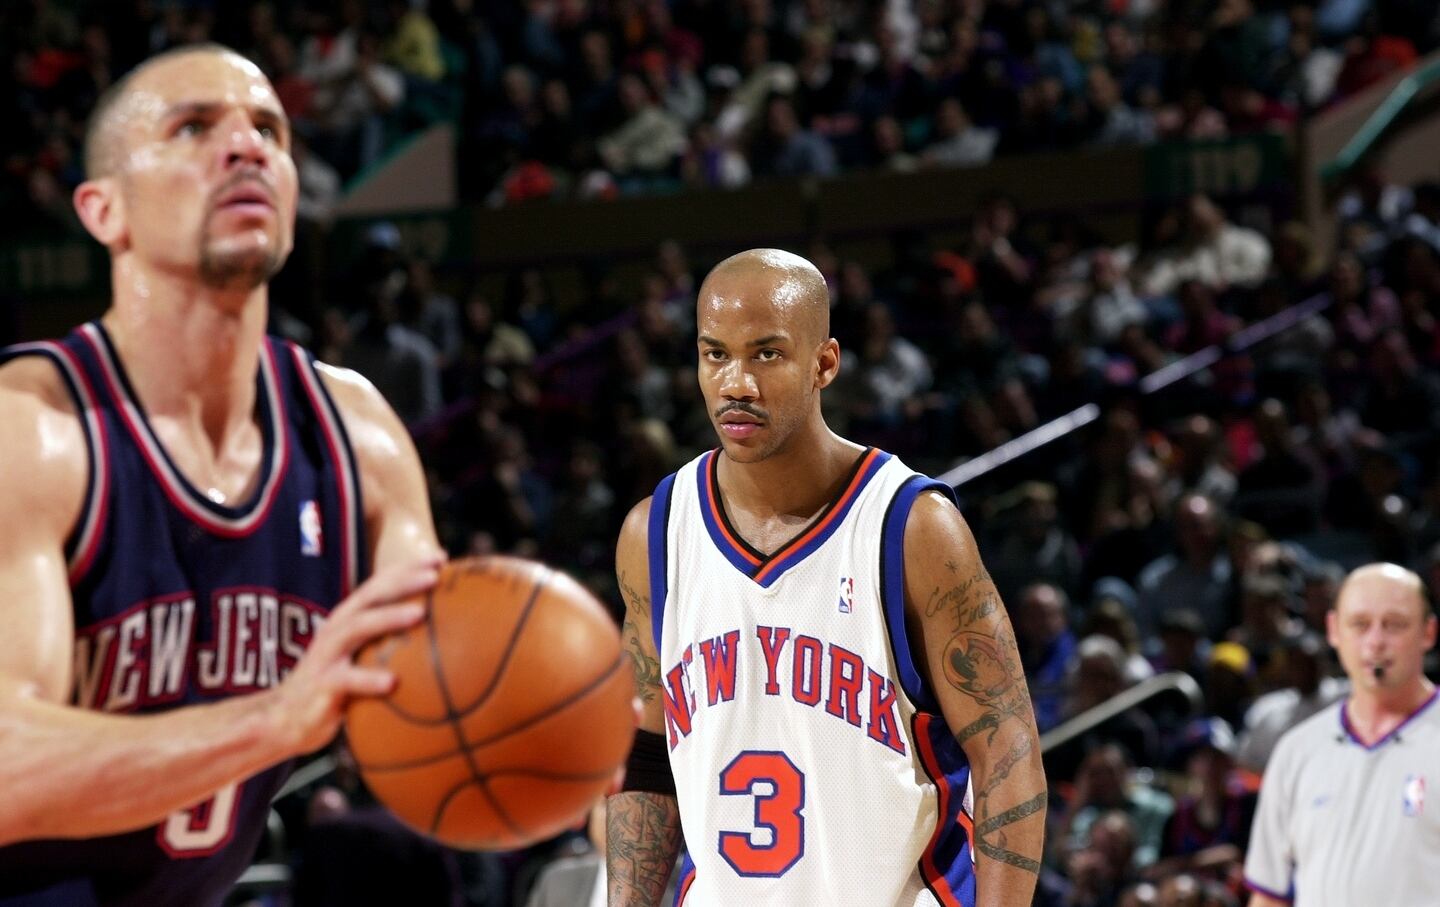 The New York Knicks' Stephon Marbury watches as the New Jersey Nets' Jason Kidd shoots a free throw in the second half of Game 4 of first-round playoffs at Madison Square Garden.